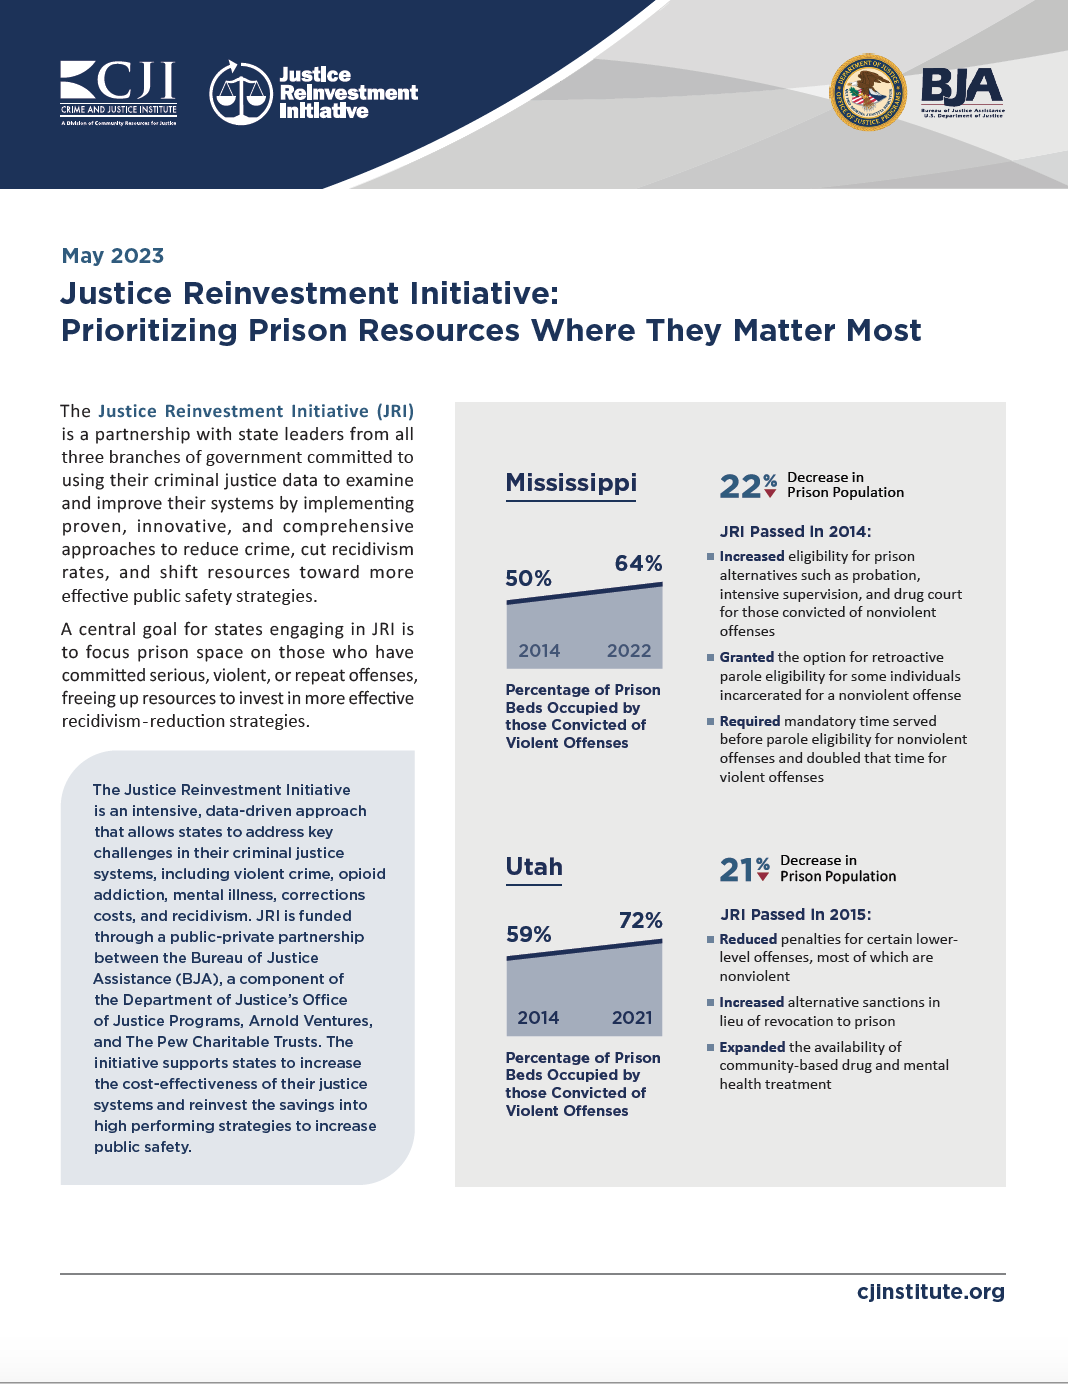 Justice Reinvestment Initiative: Prioritizing Prison Resources Where They Matter Most 